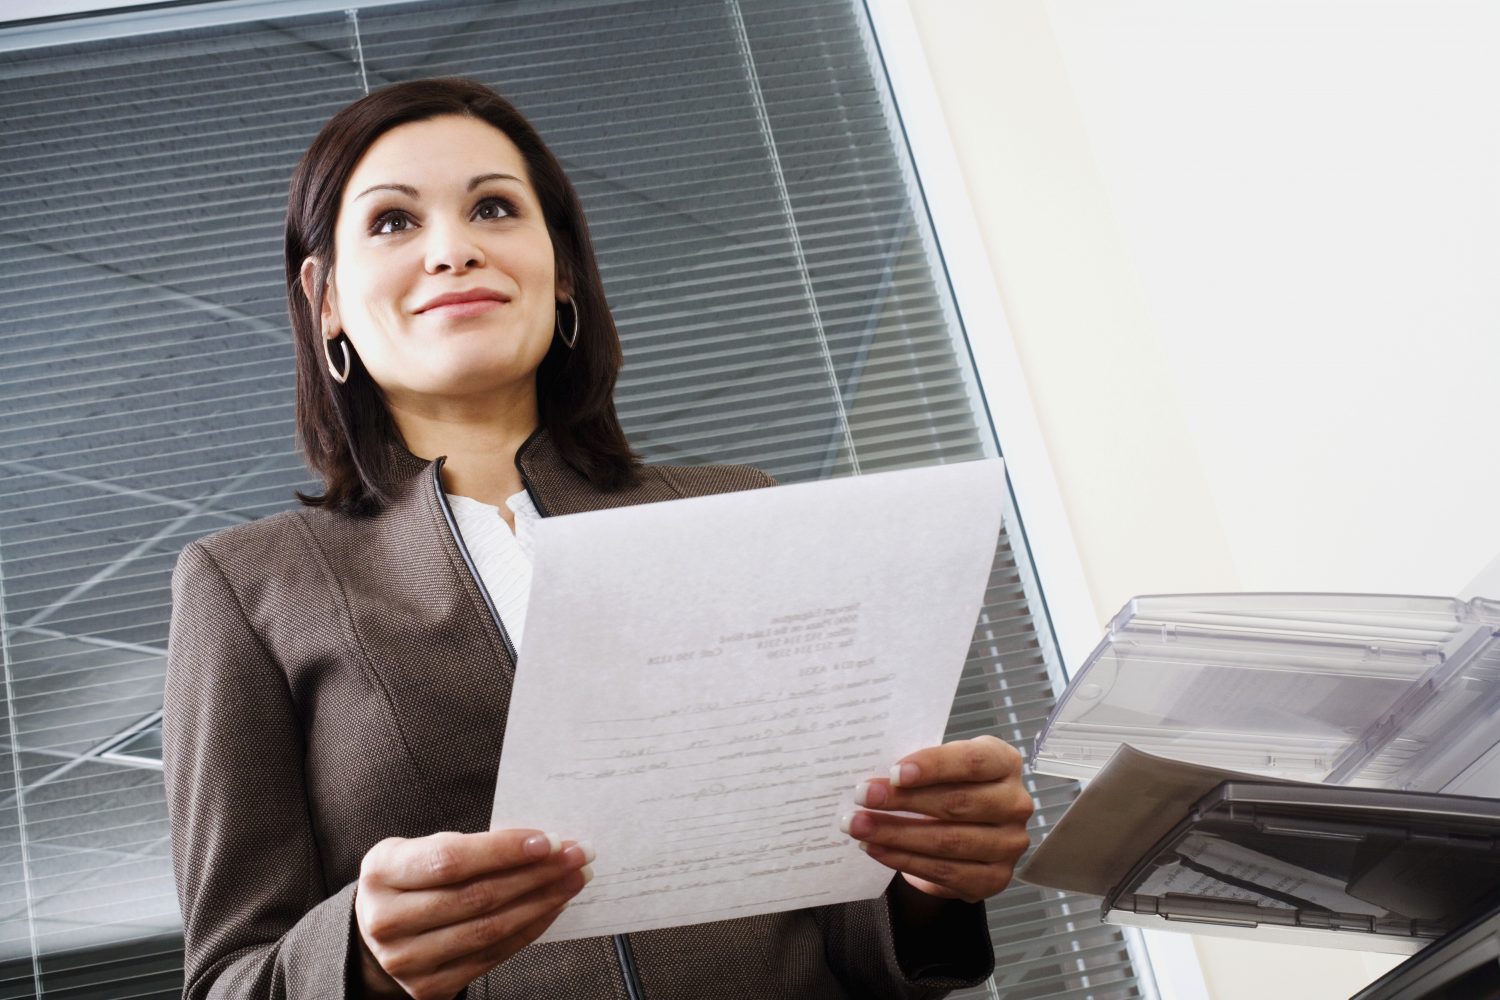 Updating your resume to get the job you want